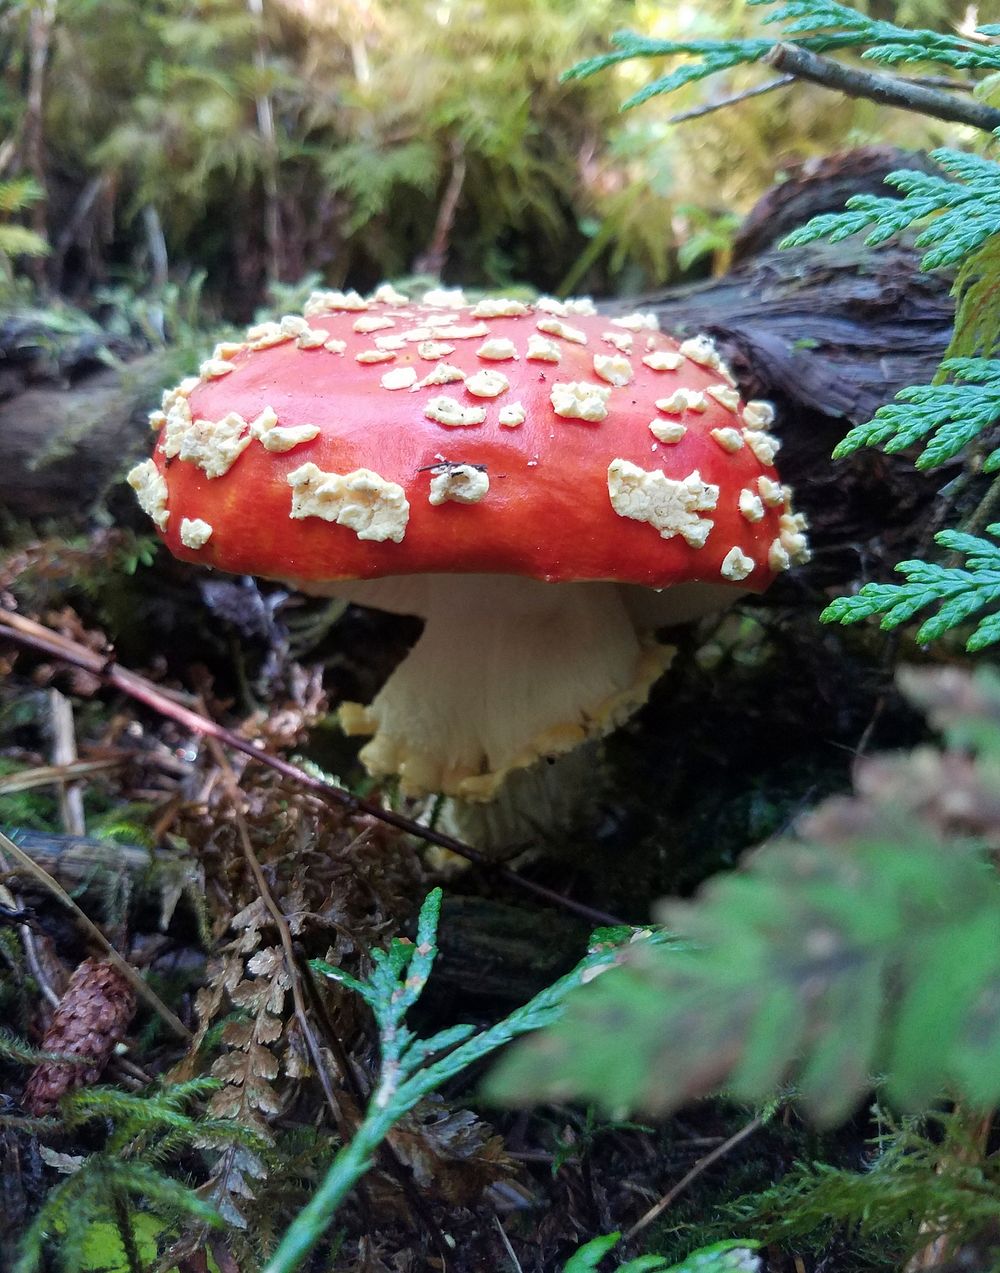 Amanita muscaria. Thorne Bay Ranger District, Tongass National Forest. Original public domain image from Flickr